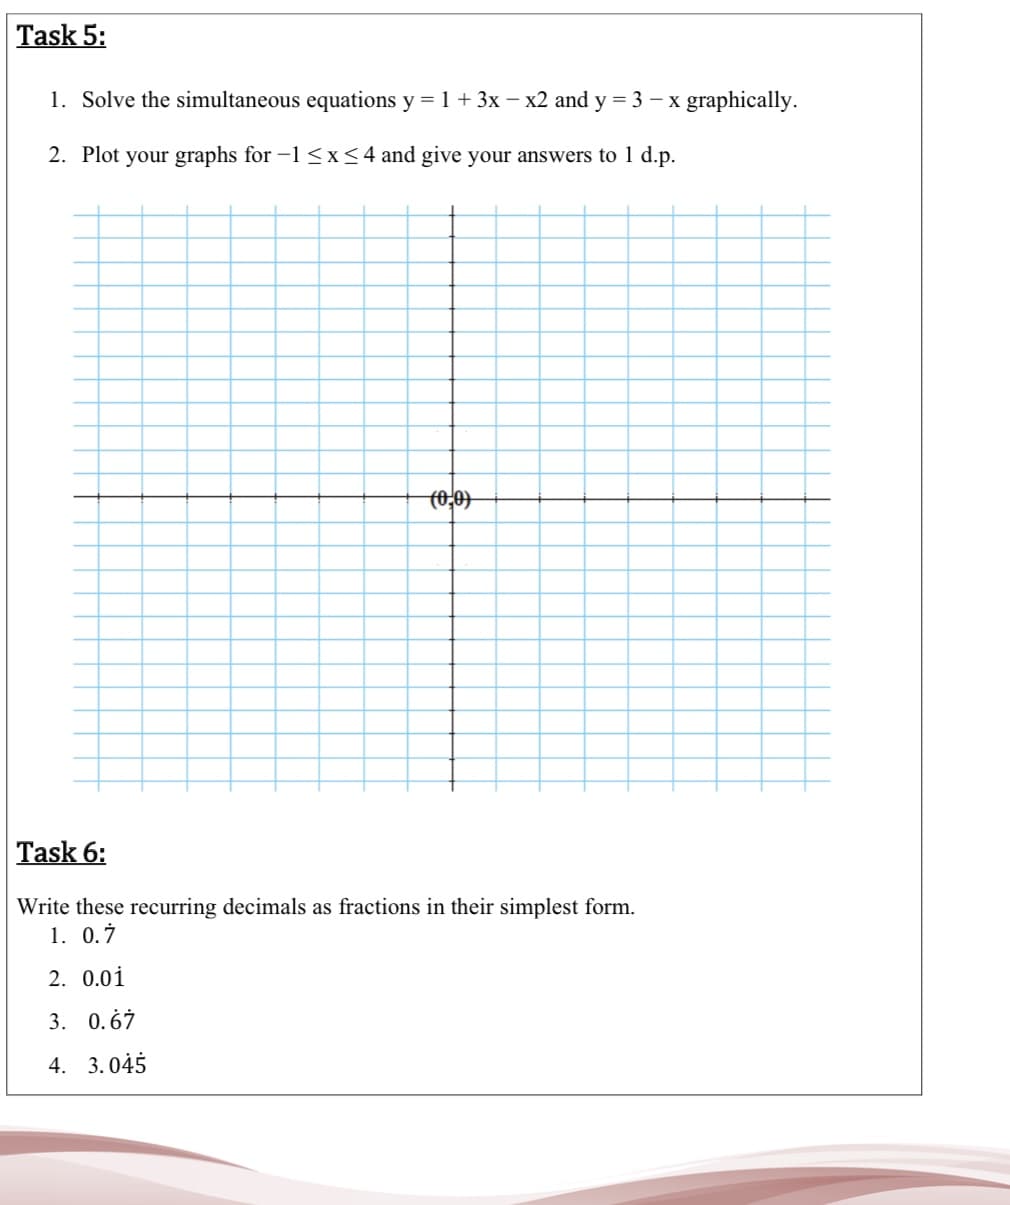 1. Solve the simultaneous equations y = 1 + 3x – x2 and y = 3 – x graphically.
2. Plot your graphs for -1 <x <4 and give your answers to 1 d.p.
